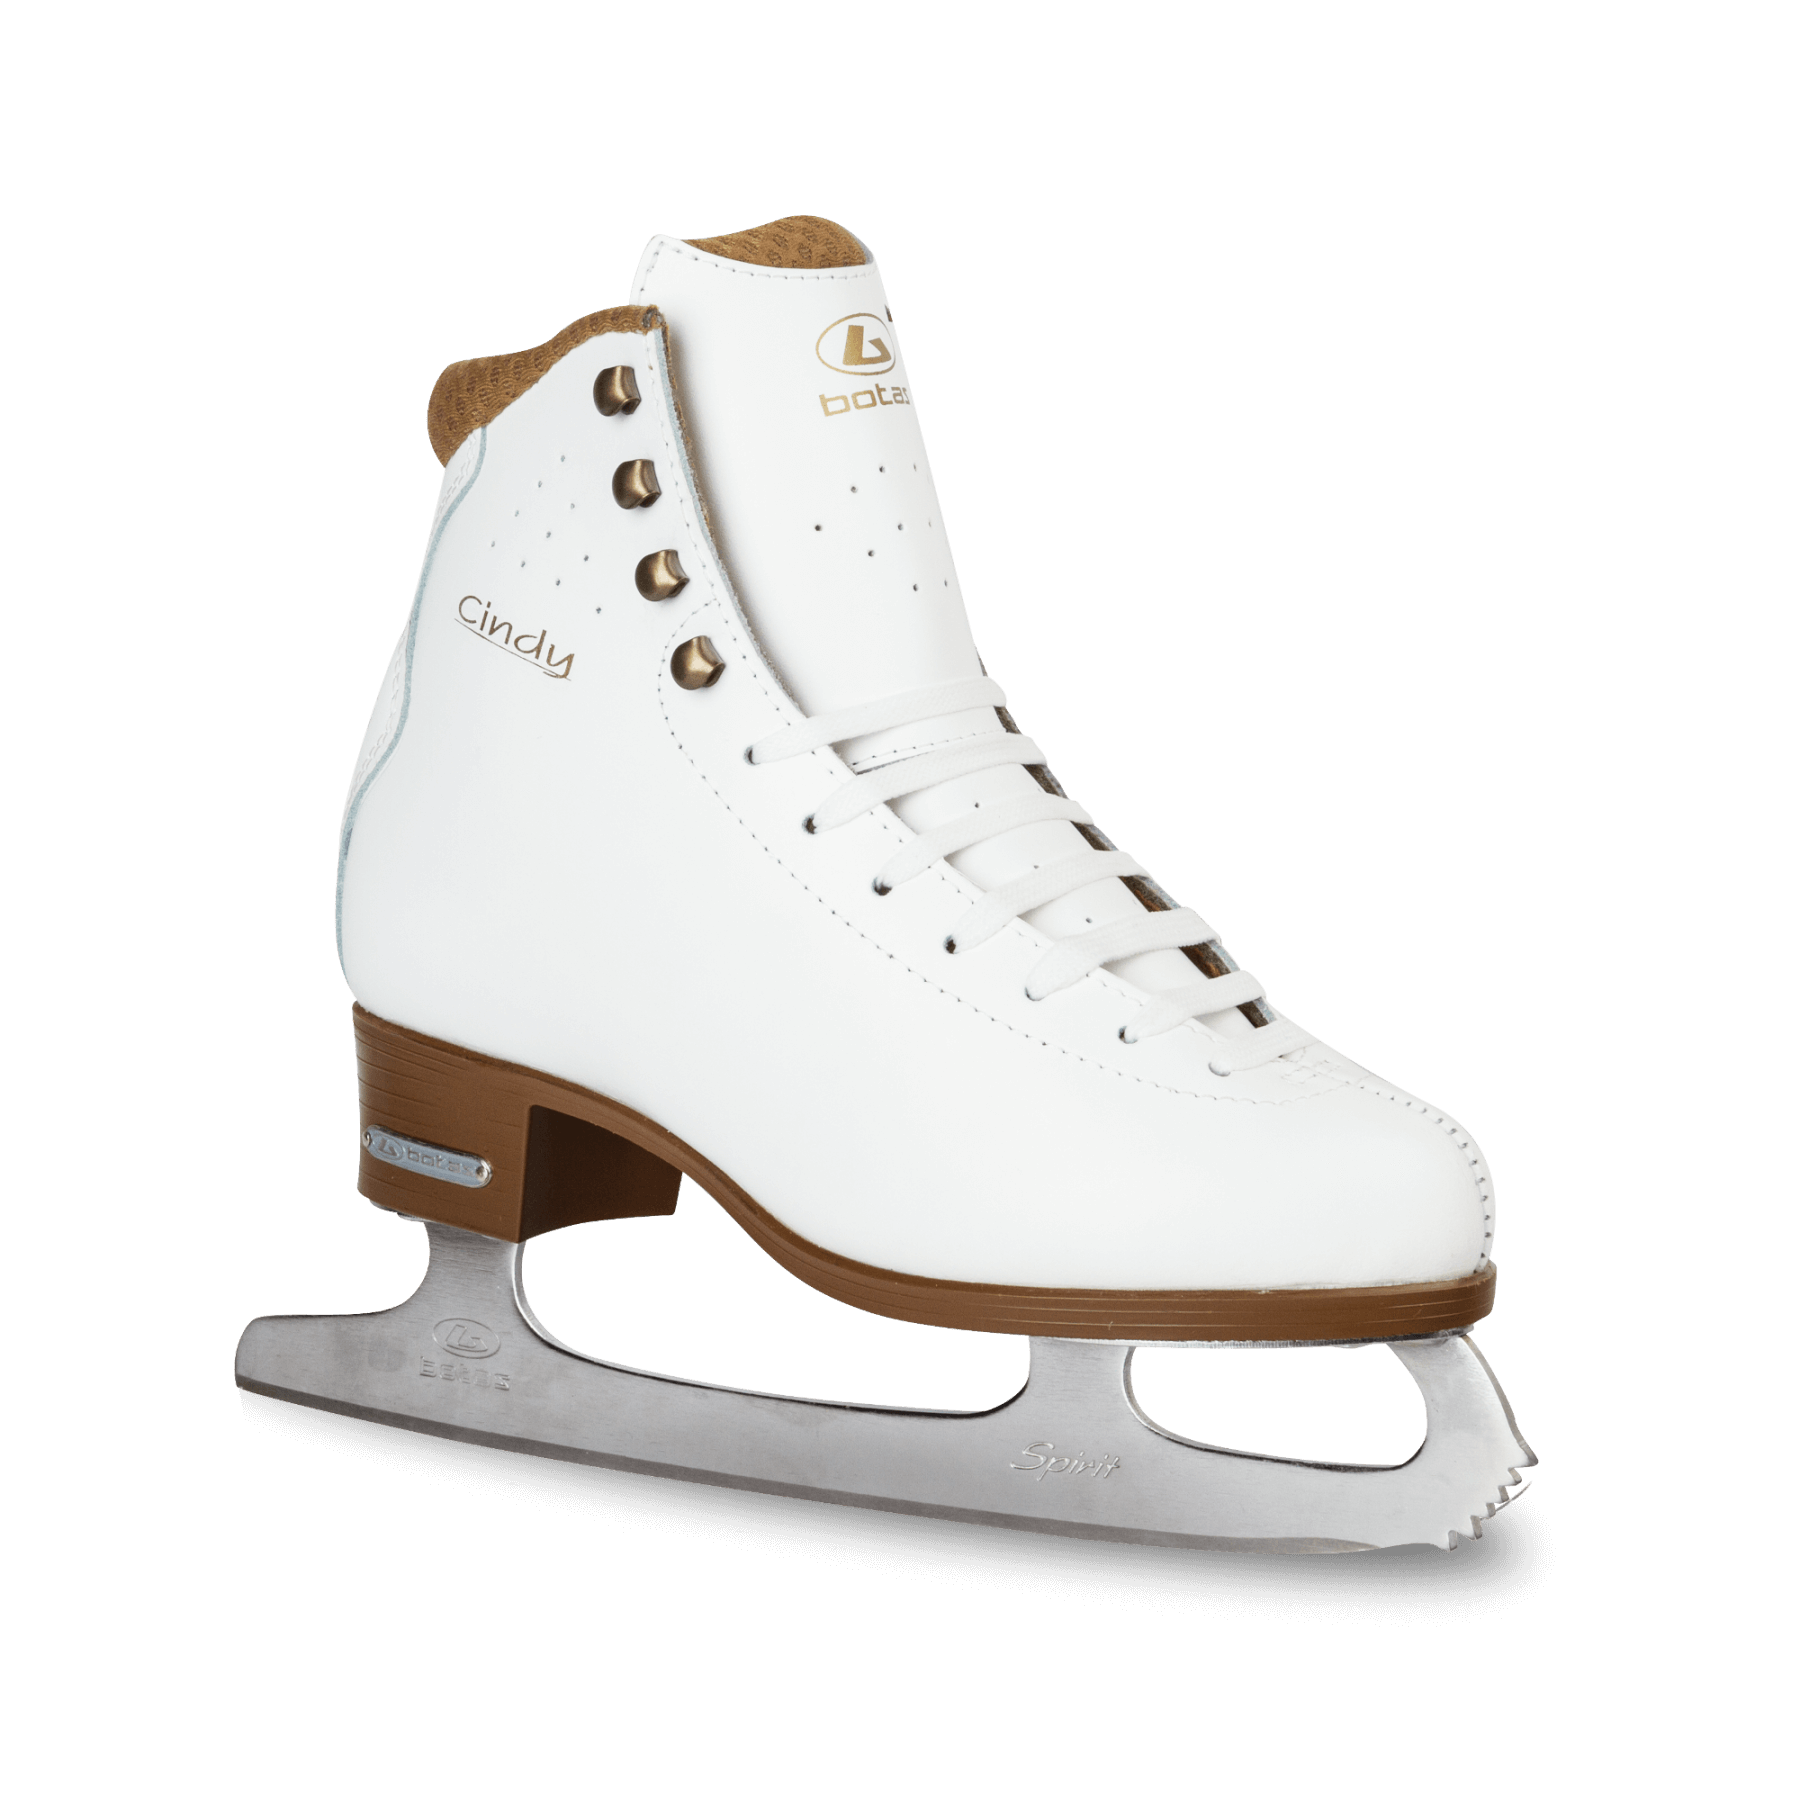 Ice Skate Image PNG - 170774